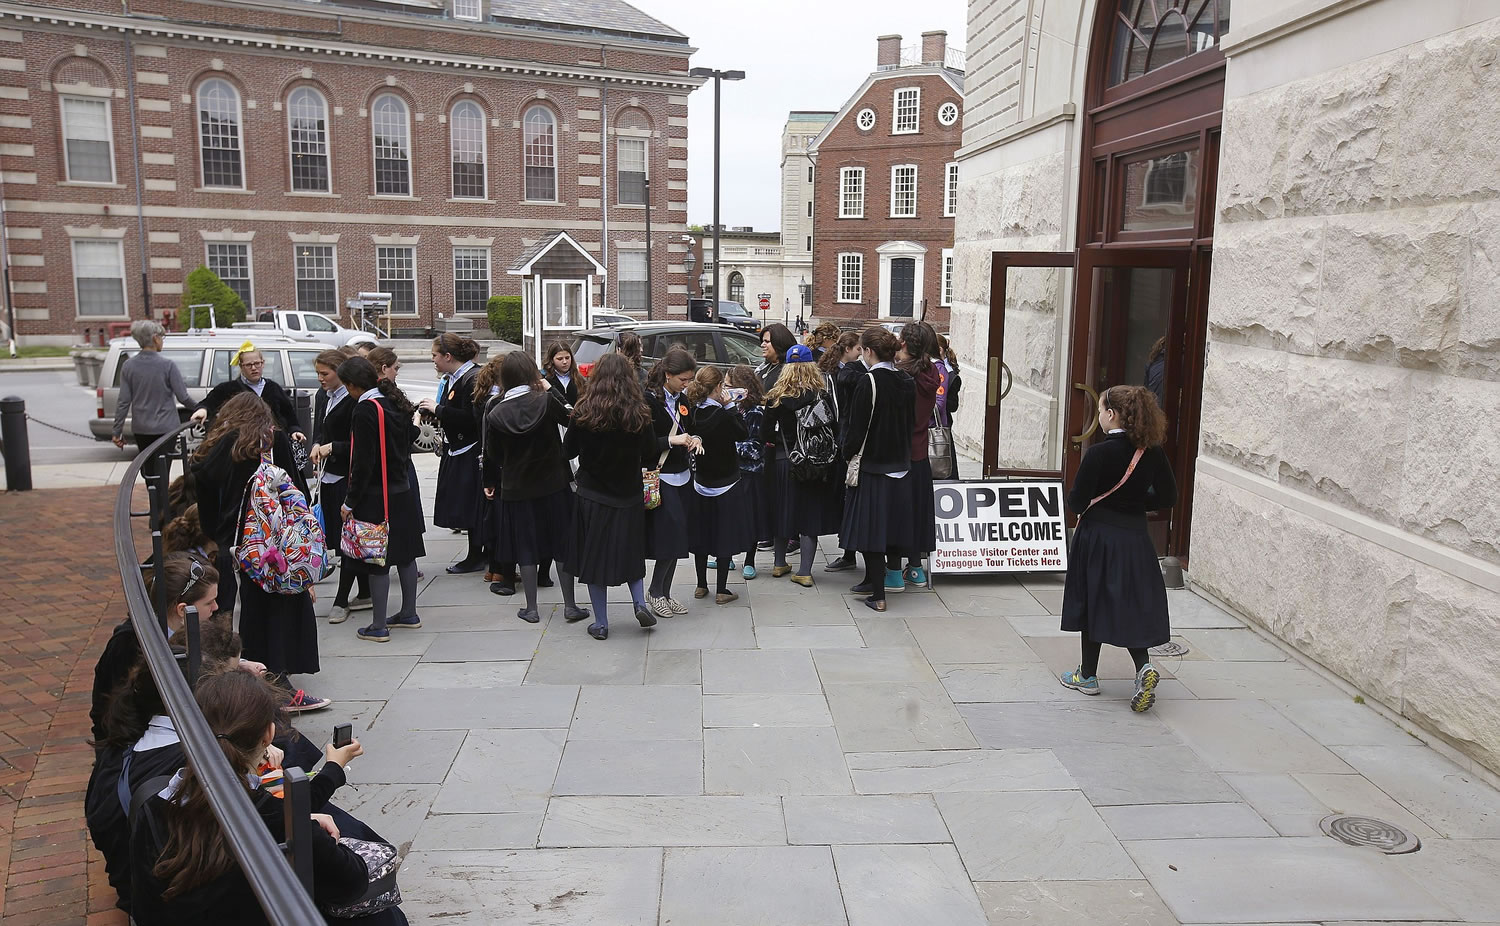 School girls gather outside the visitor's center May 28 at the Touro Synagogue during a tour in Newport, R.I.